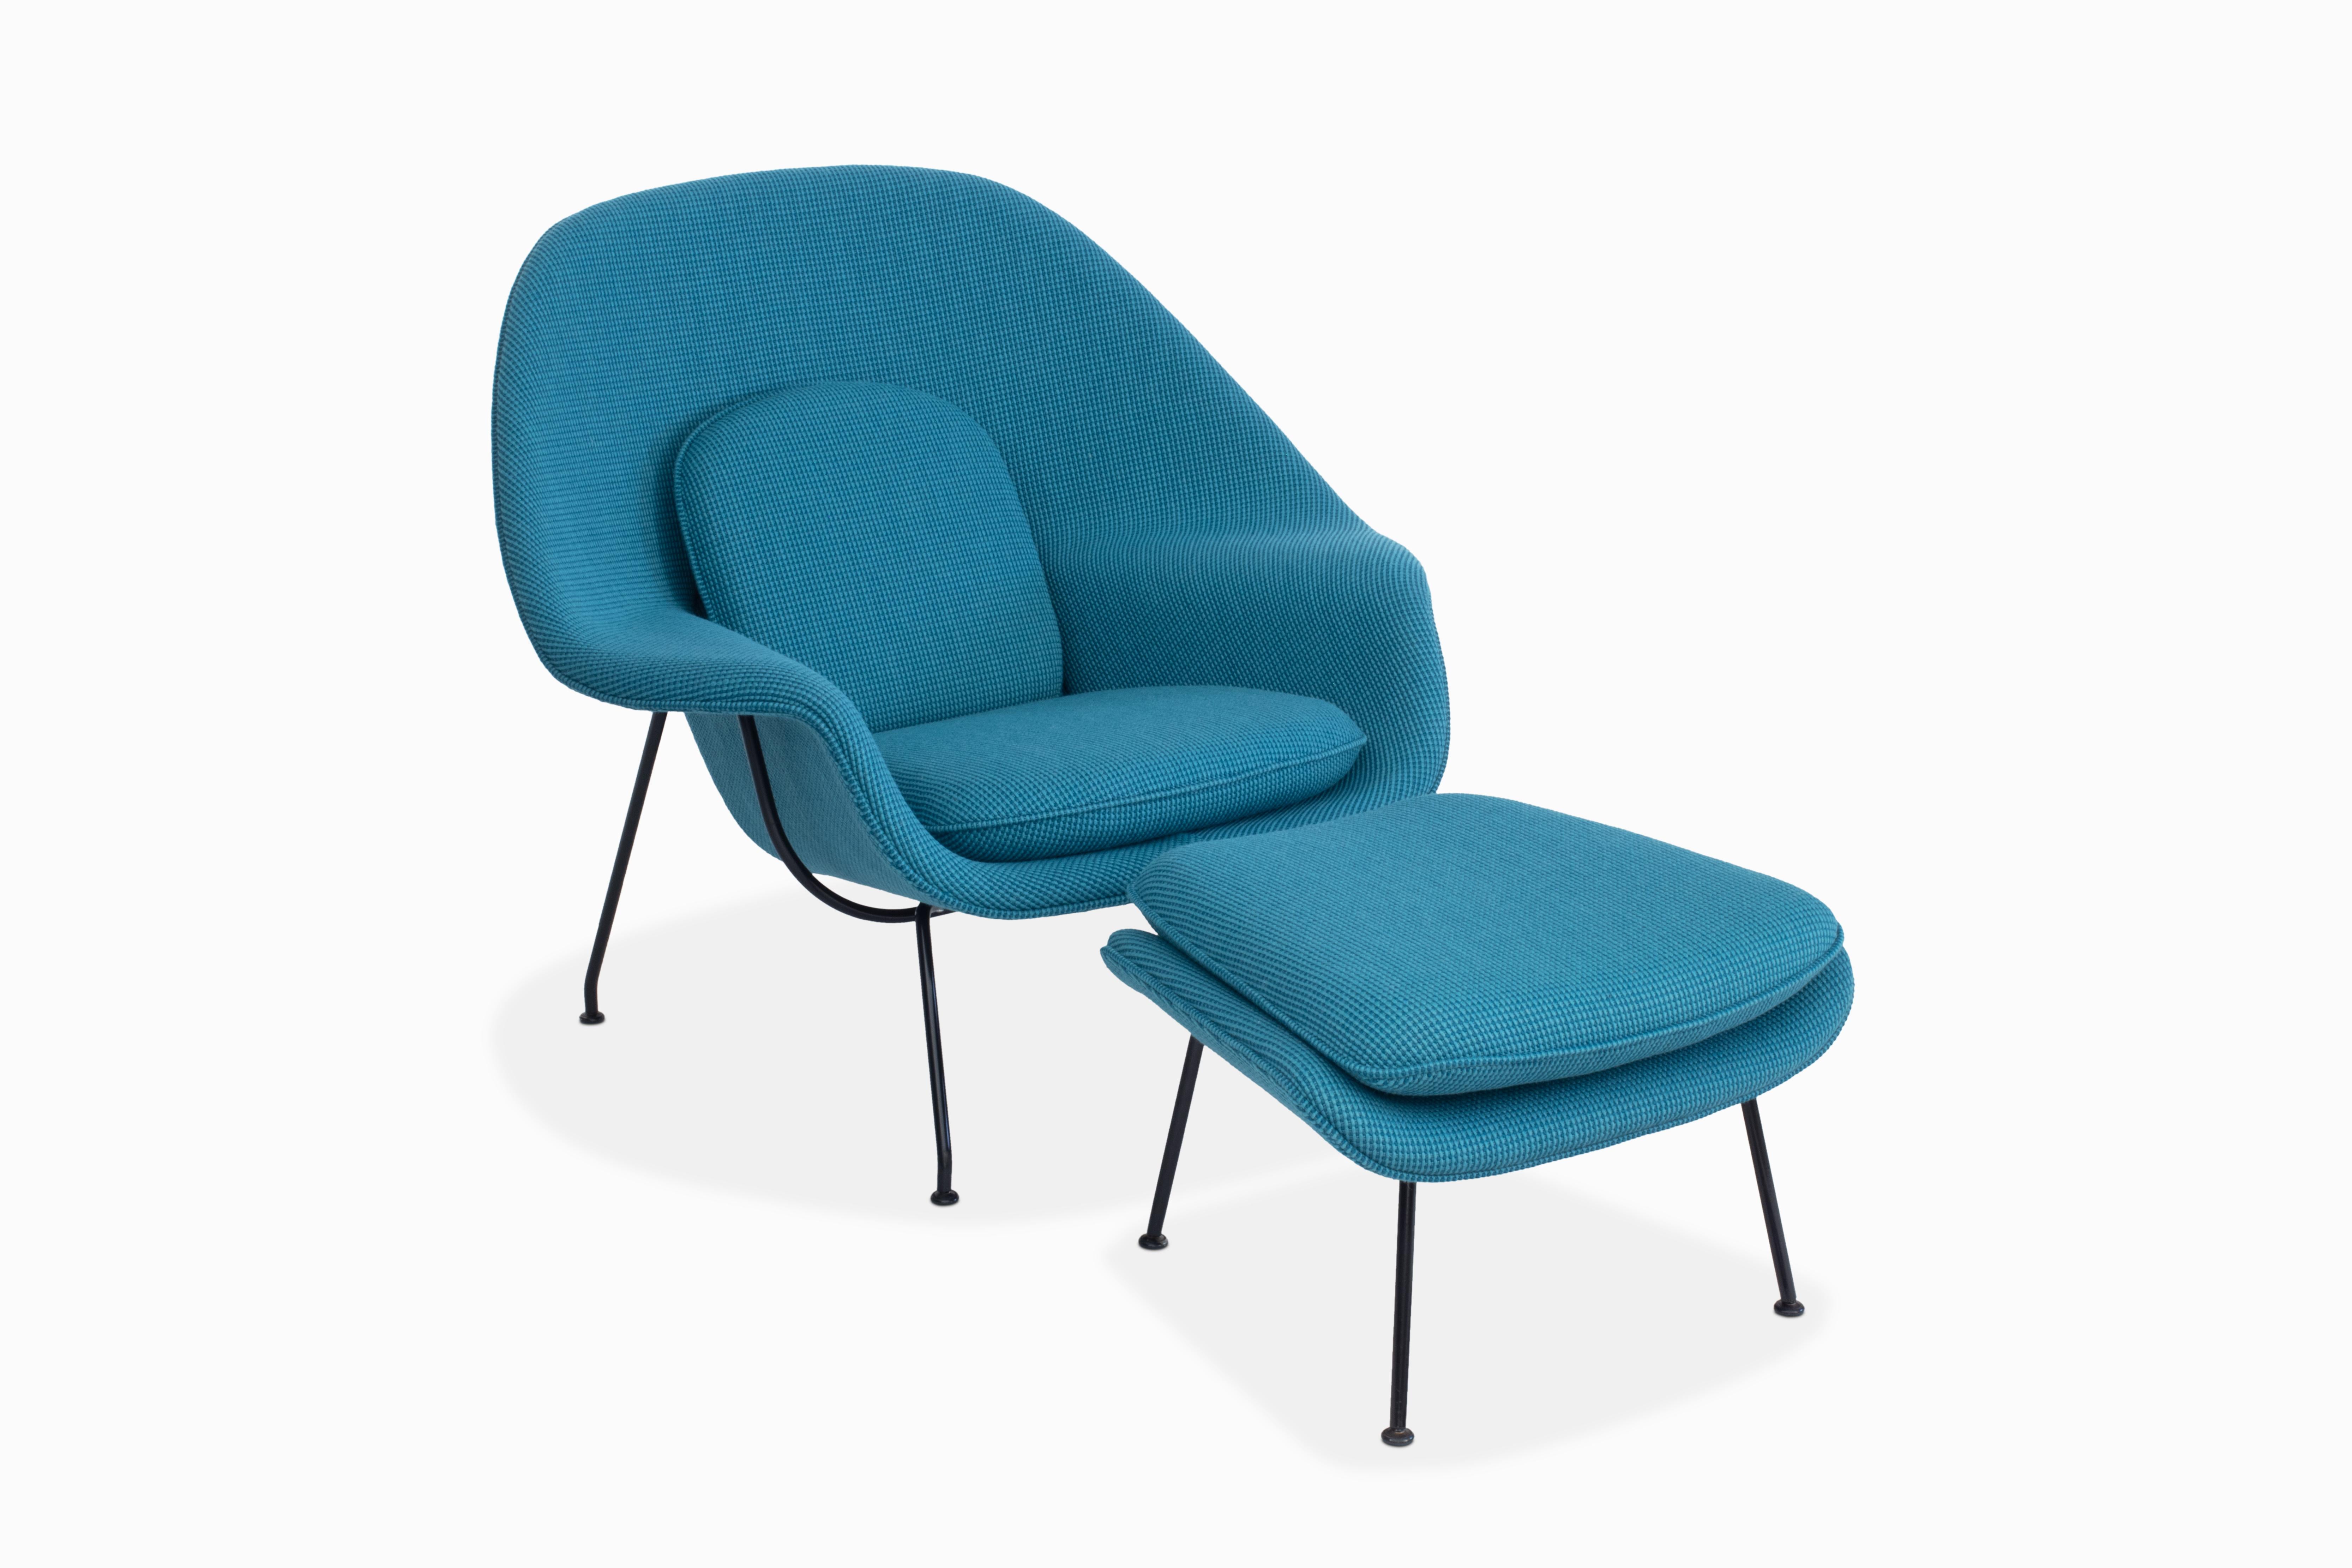 Here is an absolutely striking Womb chair and ottoman by Eero Saarinen for Knoll. This iconic lounge chair has been expertly reupholstered in premium Knoll 